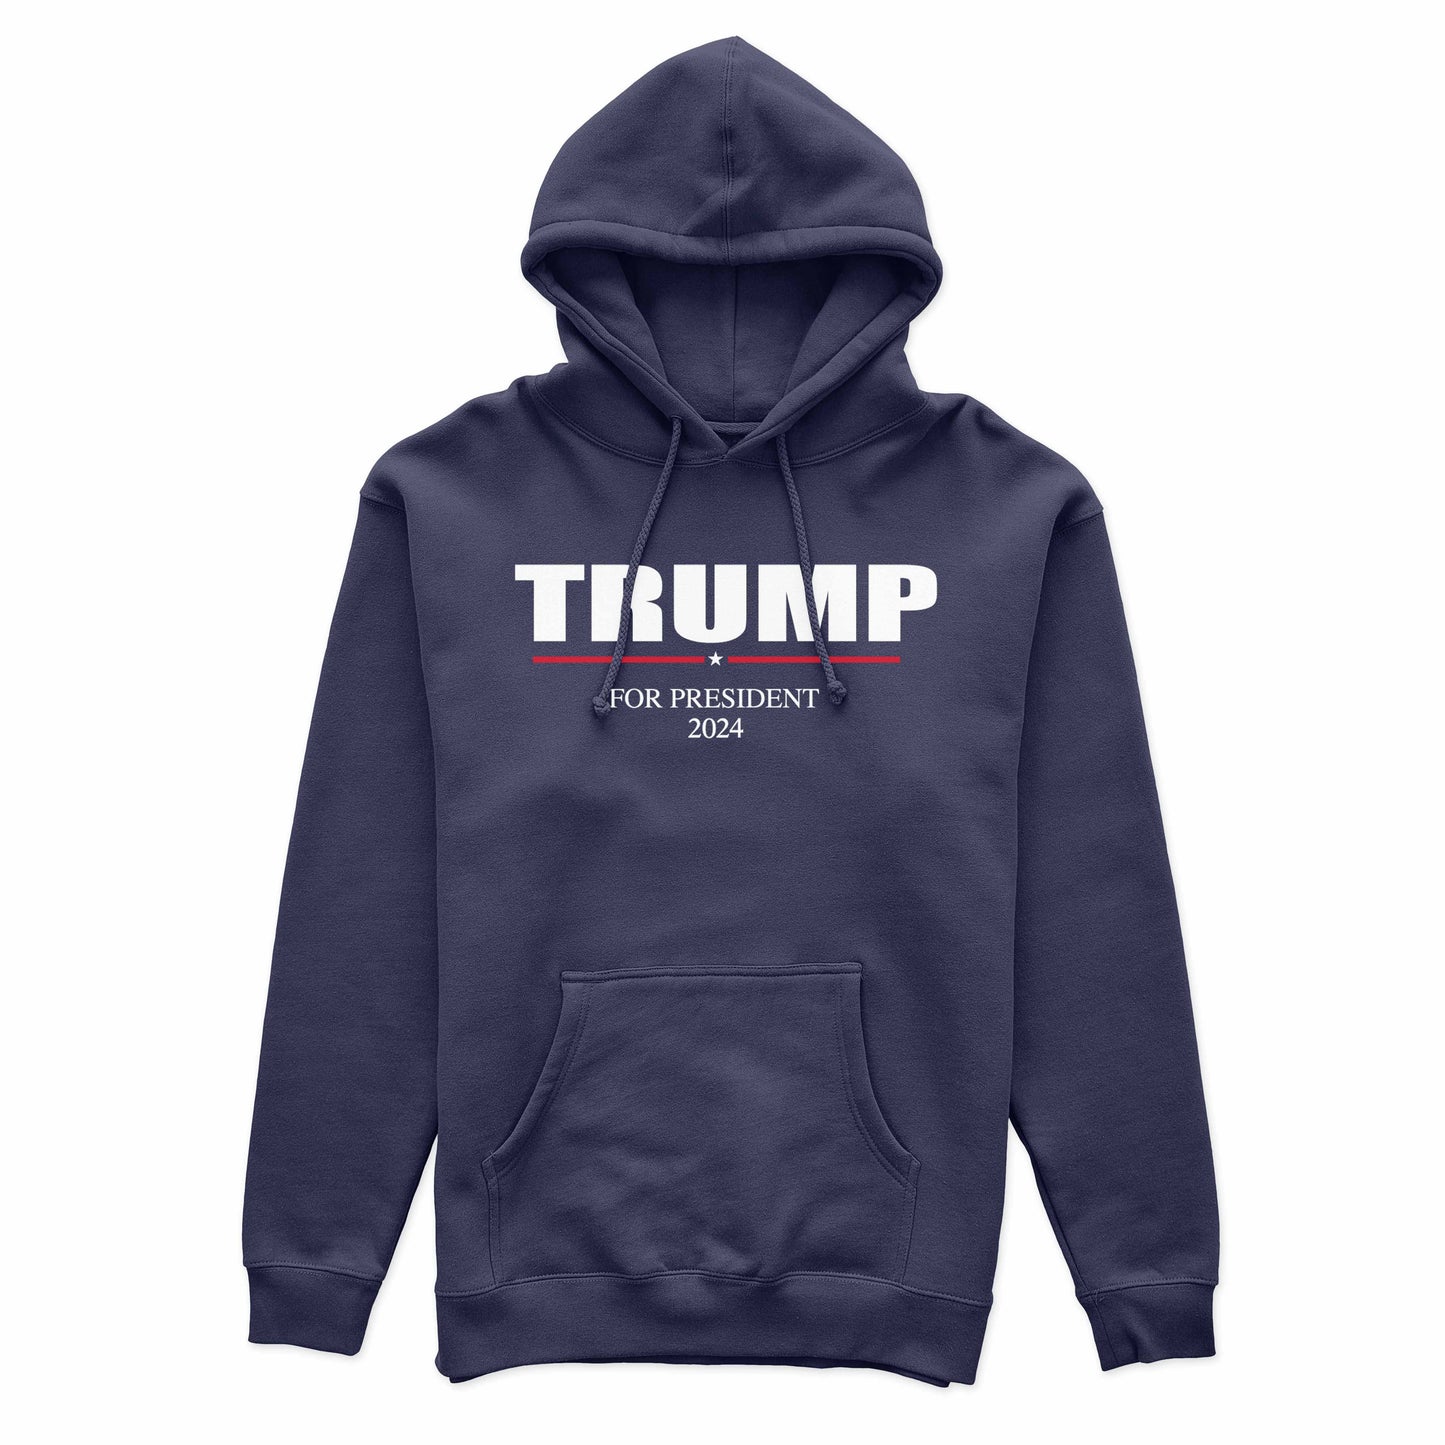 Donald Trump for President 2024 Hoodie